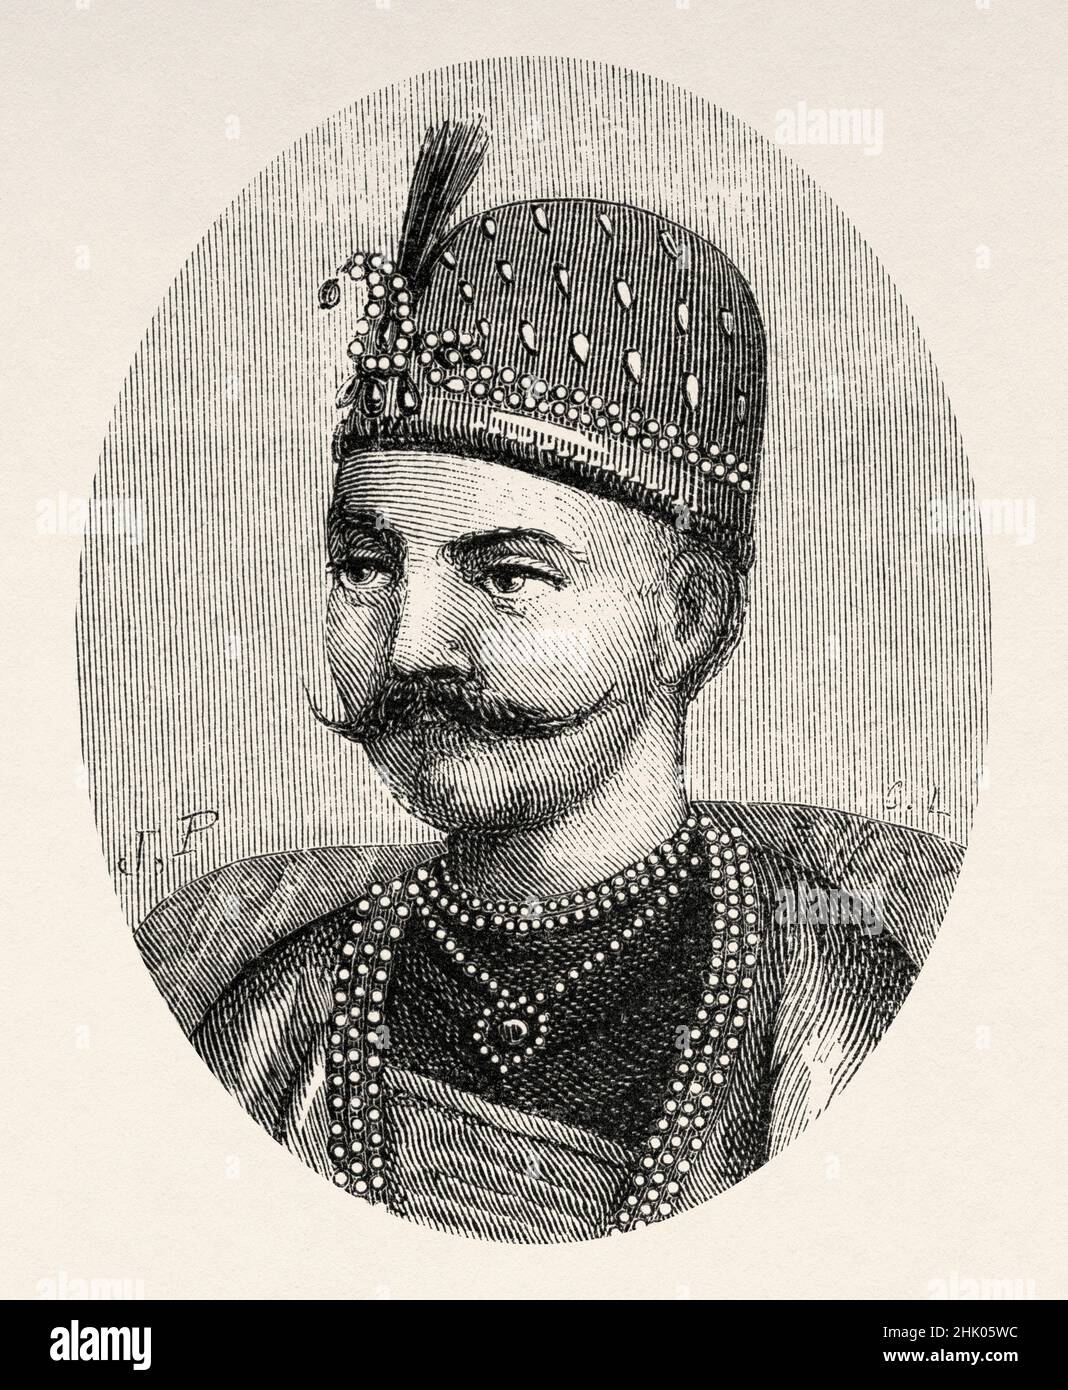 Portrait of Tantia Tope. Tatya Tope (1814-1859) was a general in the Indian Rebellion of 1857, executed by the British Government at Shivpuri on 18 April 1859, India, Asia. Old 19th century engraved illustration from Trip to Punjab and Kashmir by Guillaume Lejean, Le Tour du Monde 1870 Stock Photo